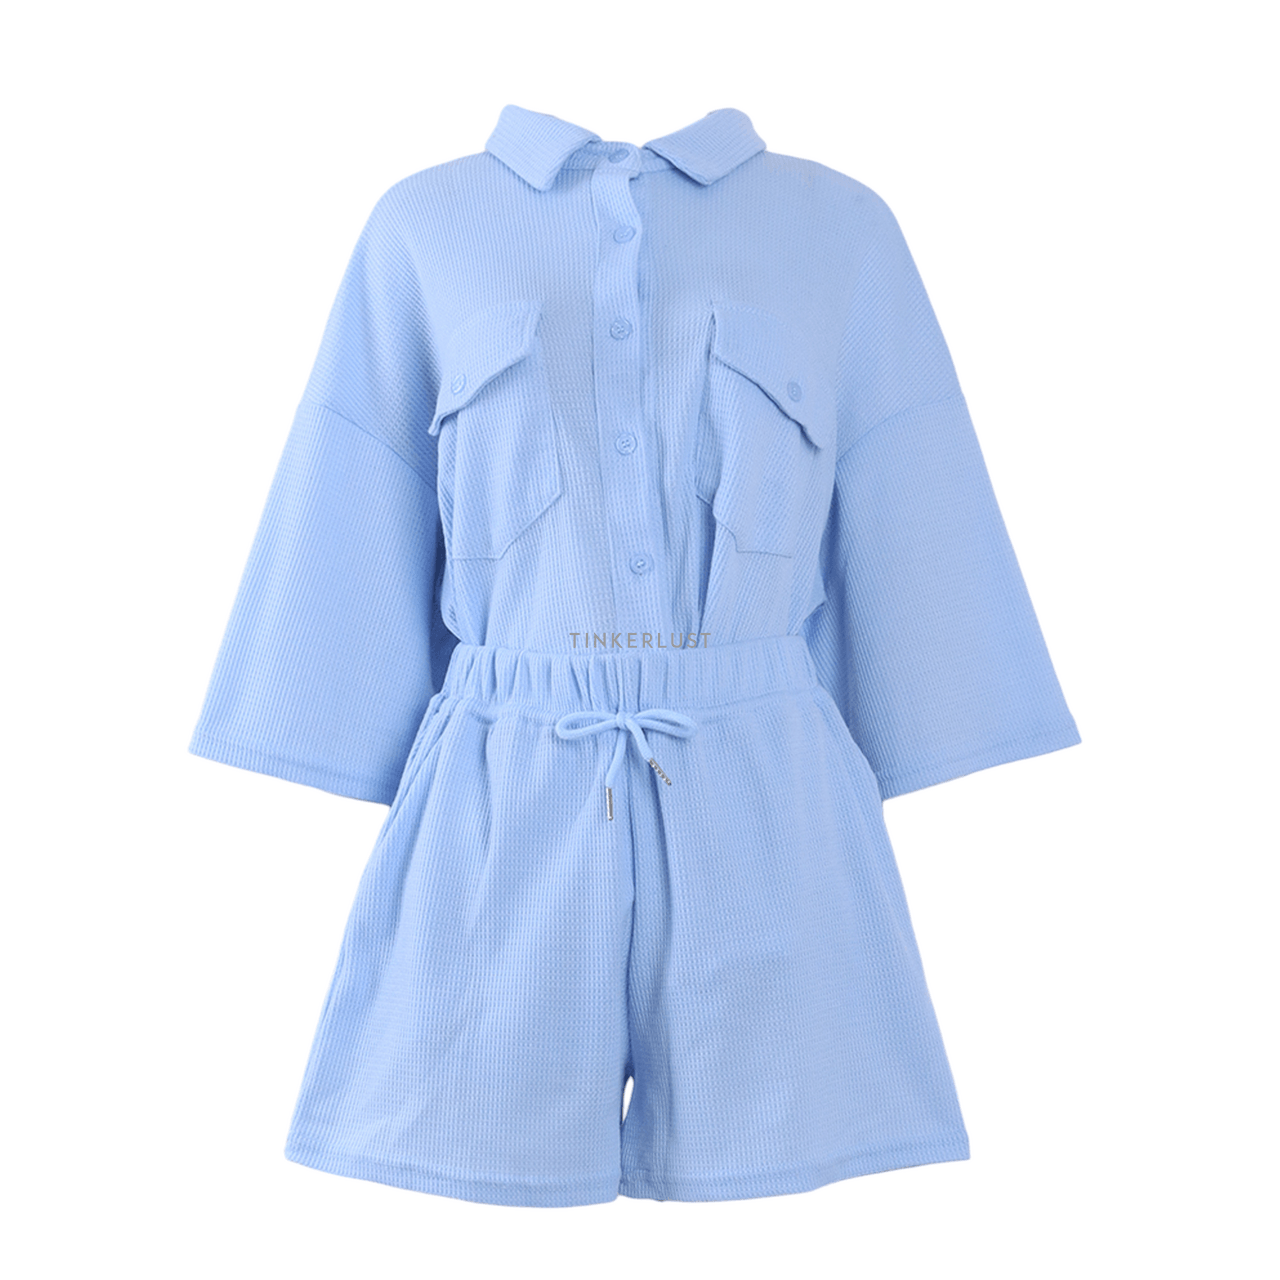 amavee-official Light Blue Two Piece